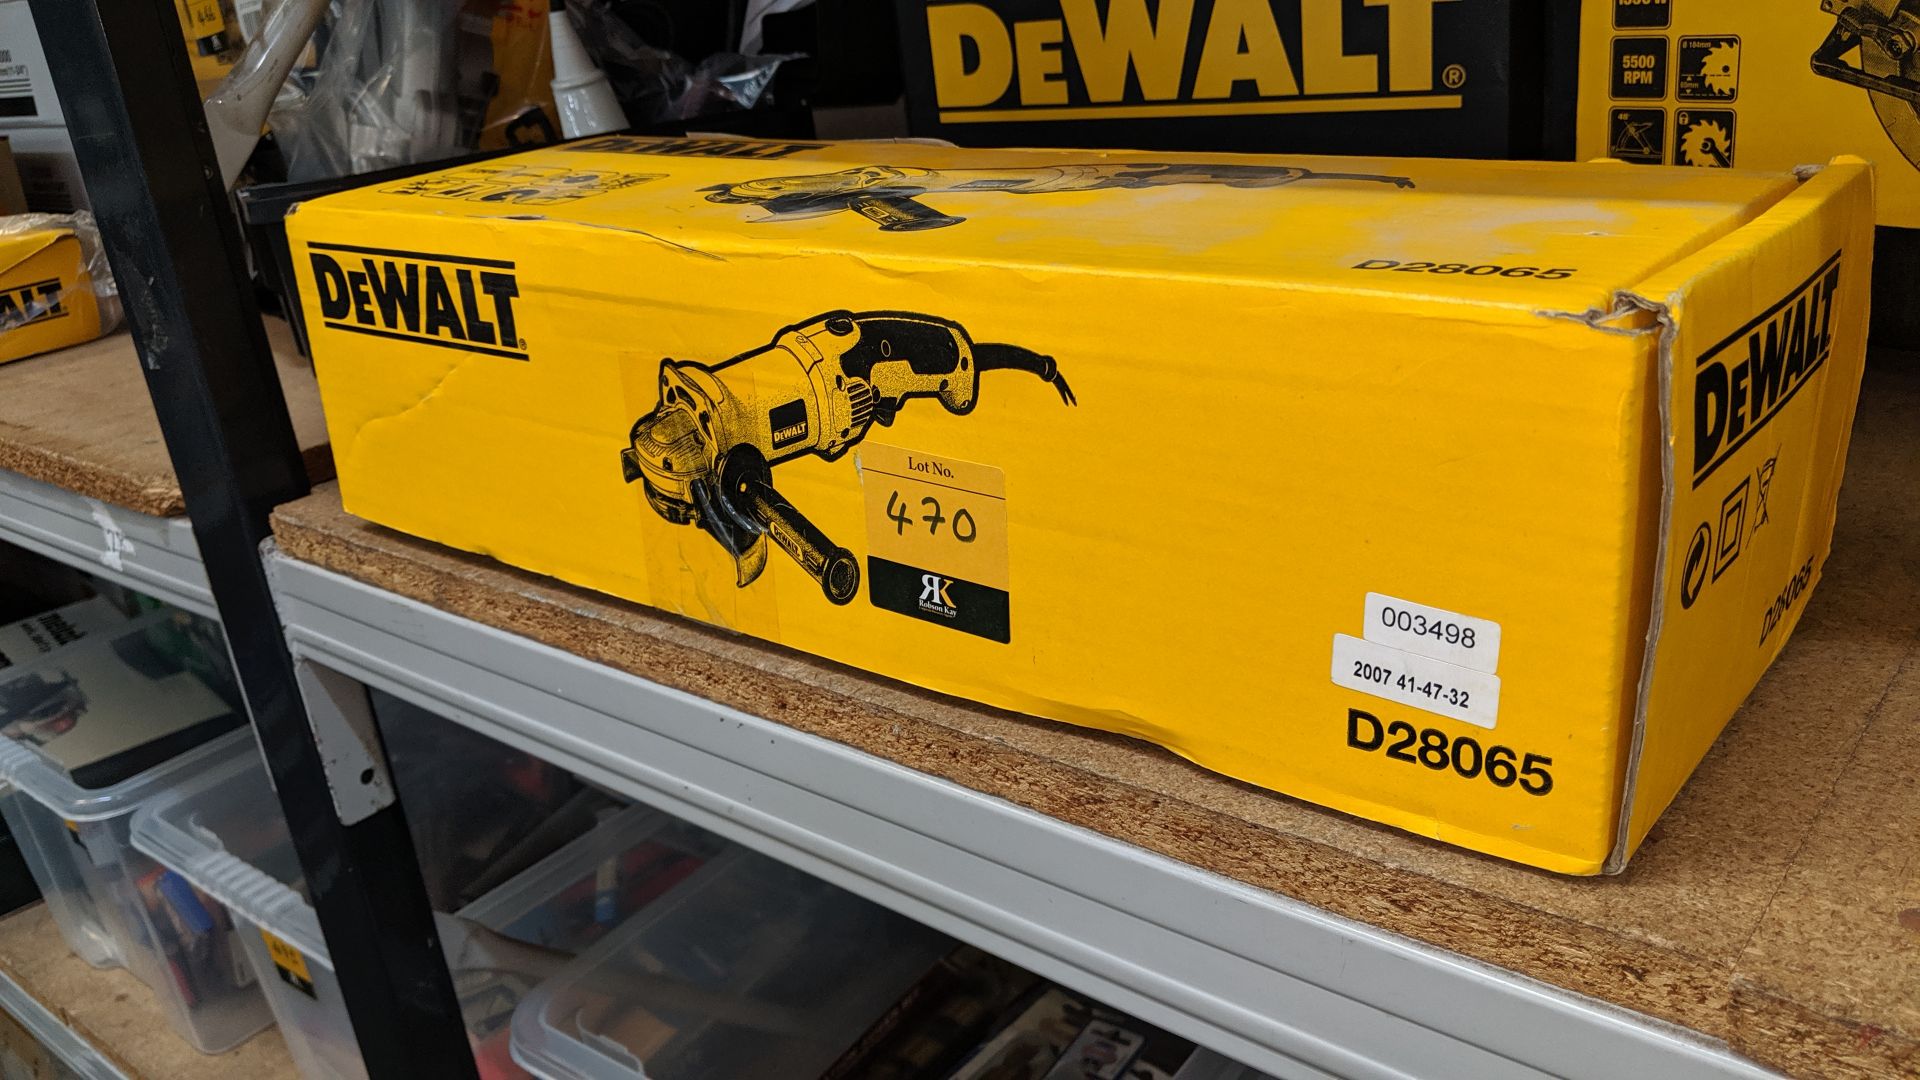 DeWalt D28065 angle grinder, 125mm, 1250W This is one of a number of lots from Rochdale Re-Tool - Image 2 of 2